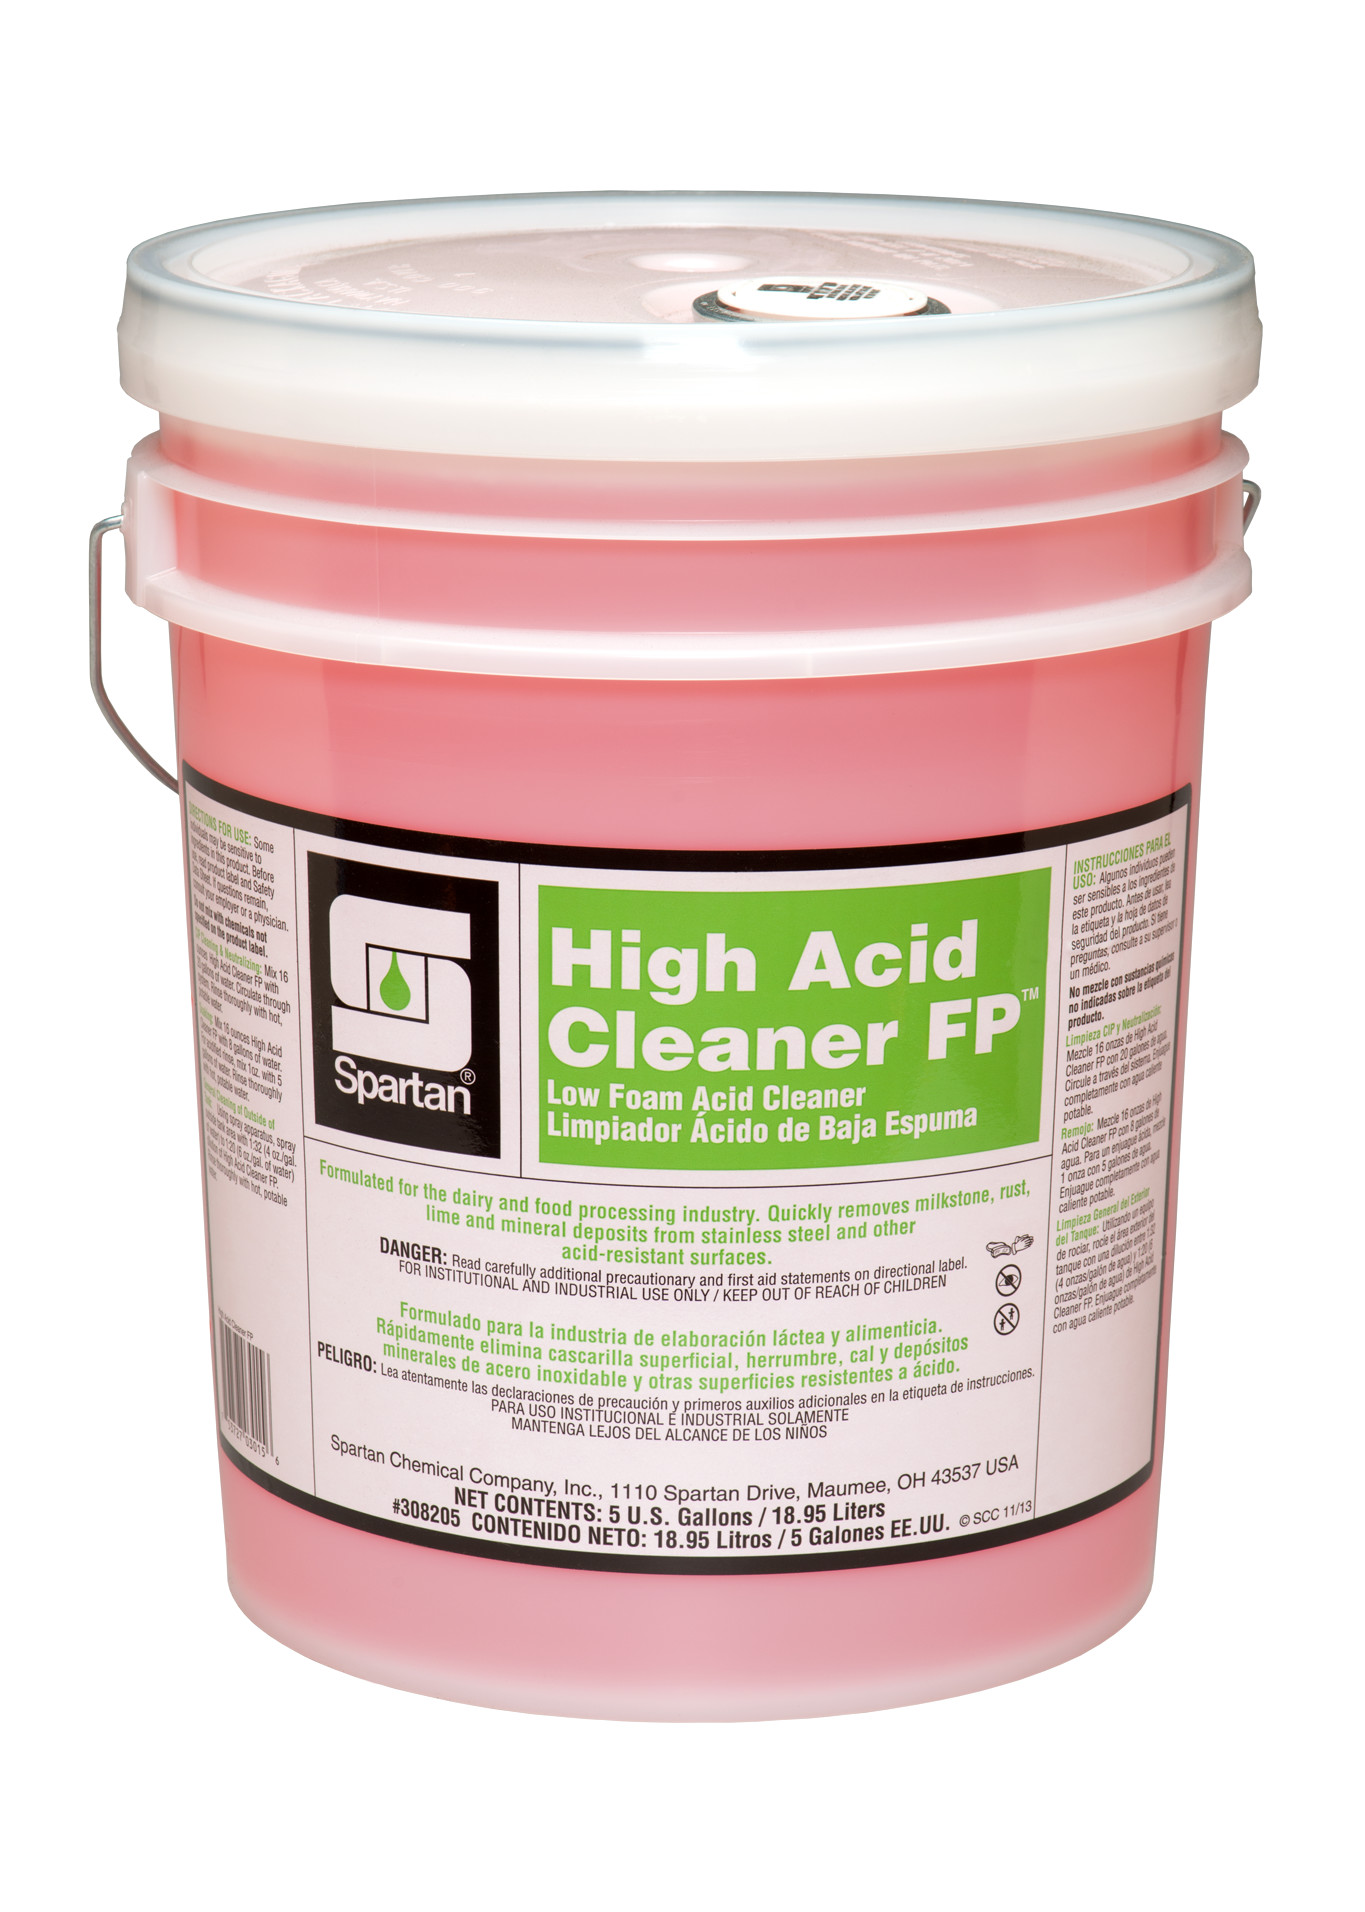 Spartan Chemical Company High Acid Cleaner FP, 5 GAL PAIL